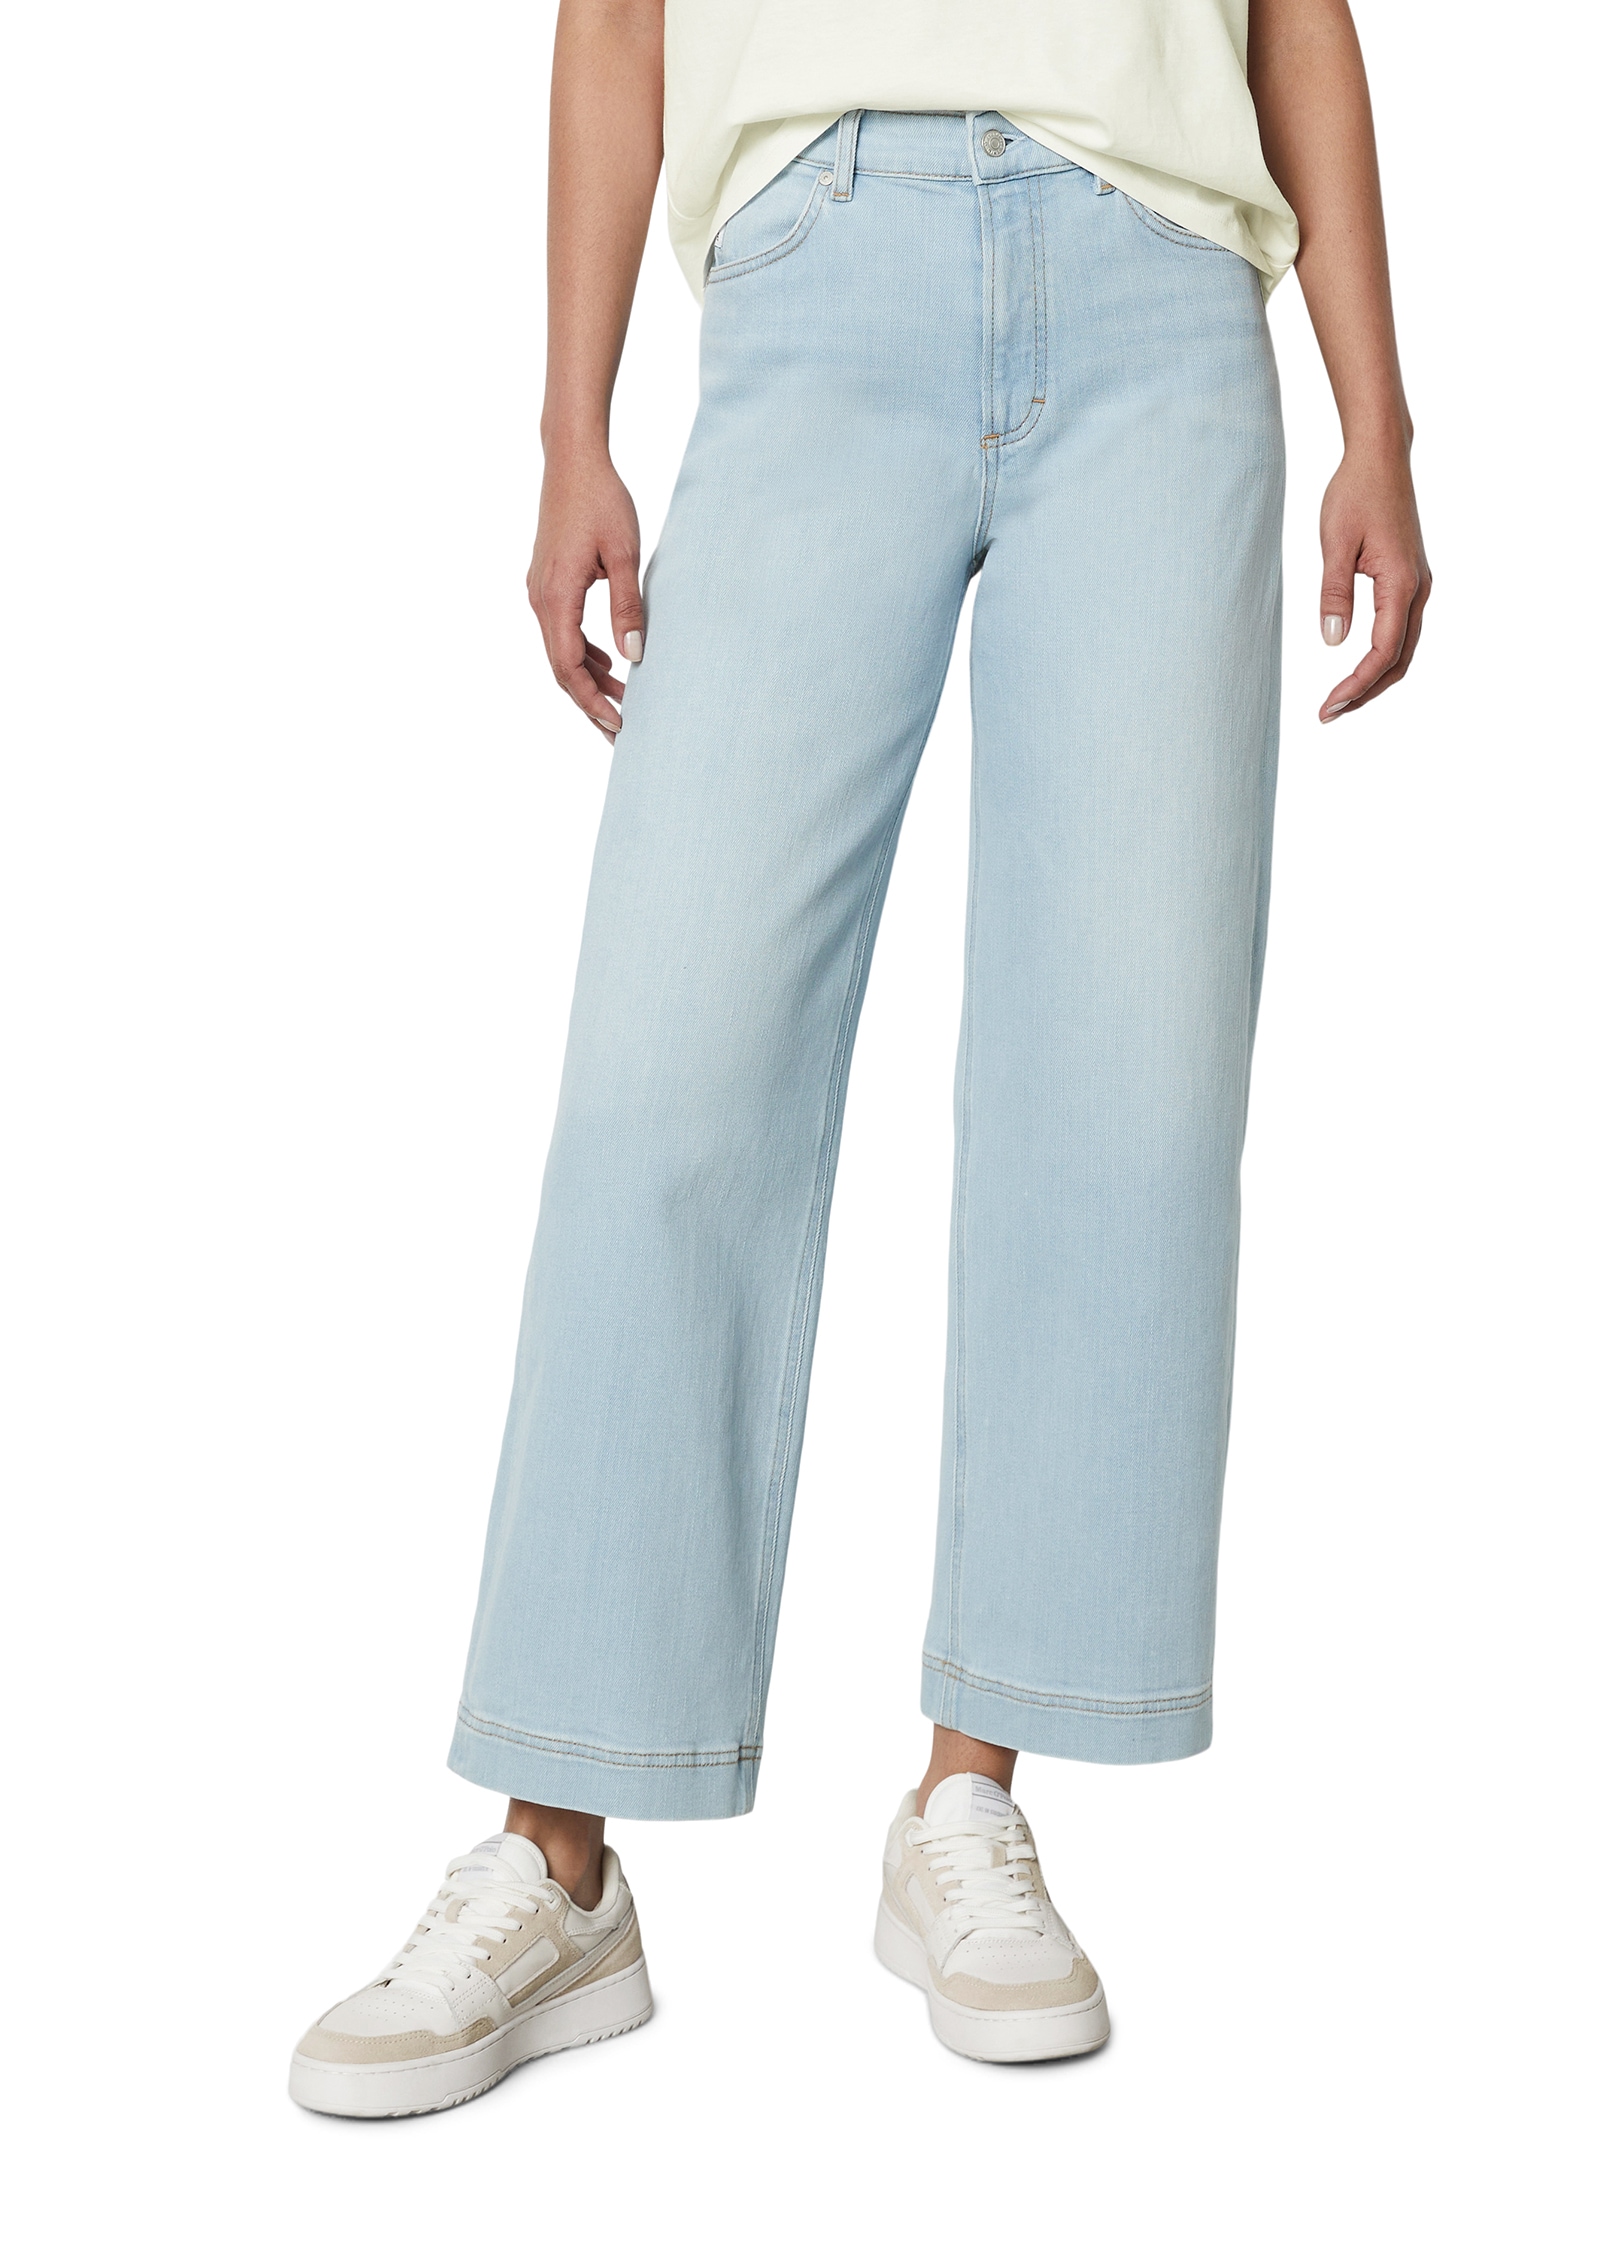 Marc O'Polo DENIM Ankle-Jeans »Modell TOMMA cropped« von Marc O'Polo DENIM